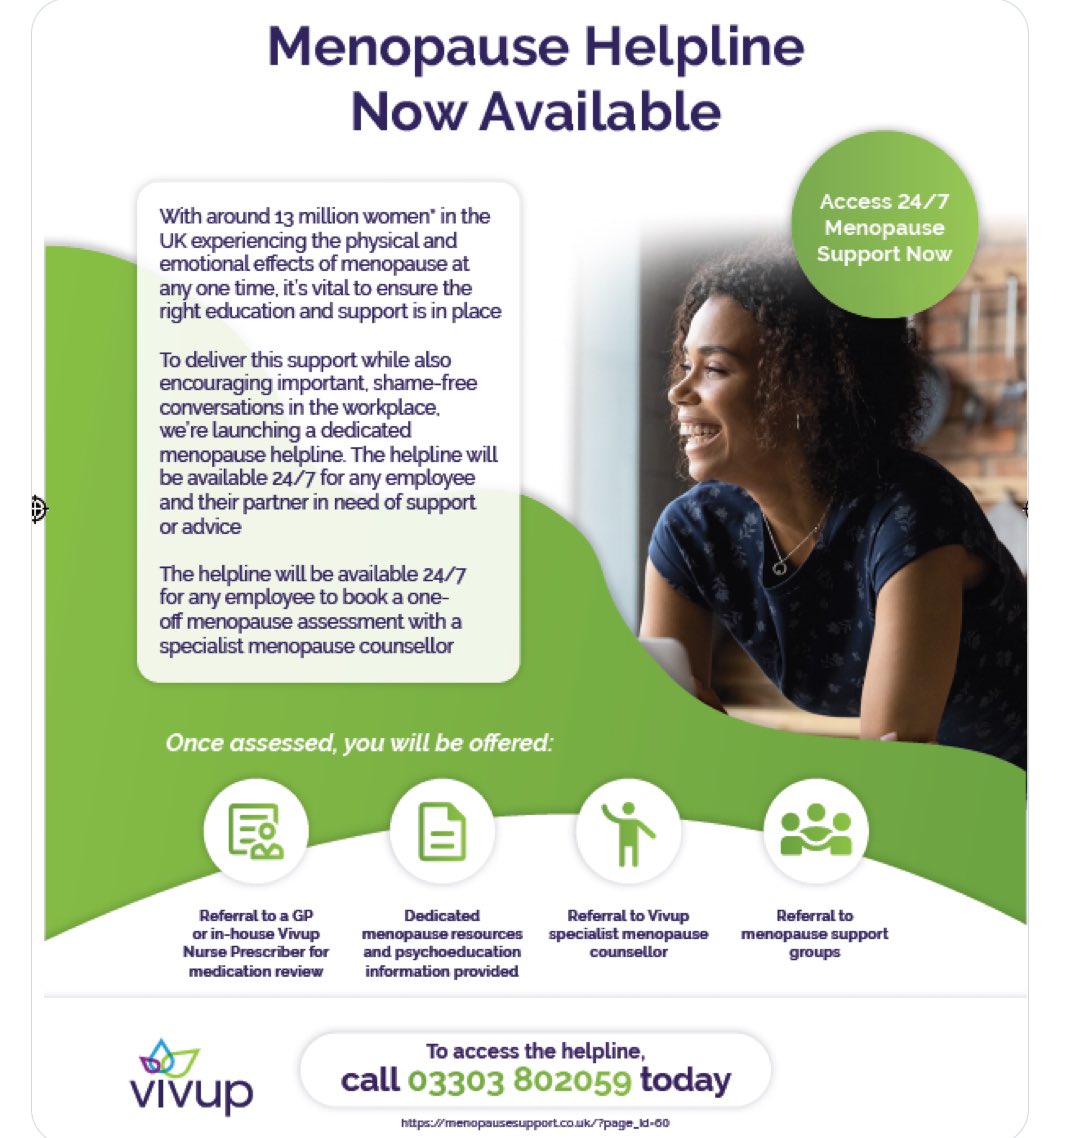 On the 1st April the Vivup Menopause support Helpline was launched and is now open to all Health and Care colleagues and partners based in all sectors in SY. If you need the extra support please call 03303 802059, 24/7. This is part of our Mission: Menopause initiative.